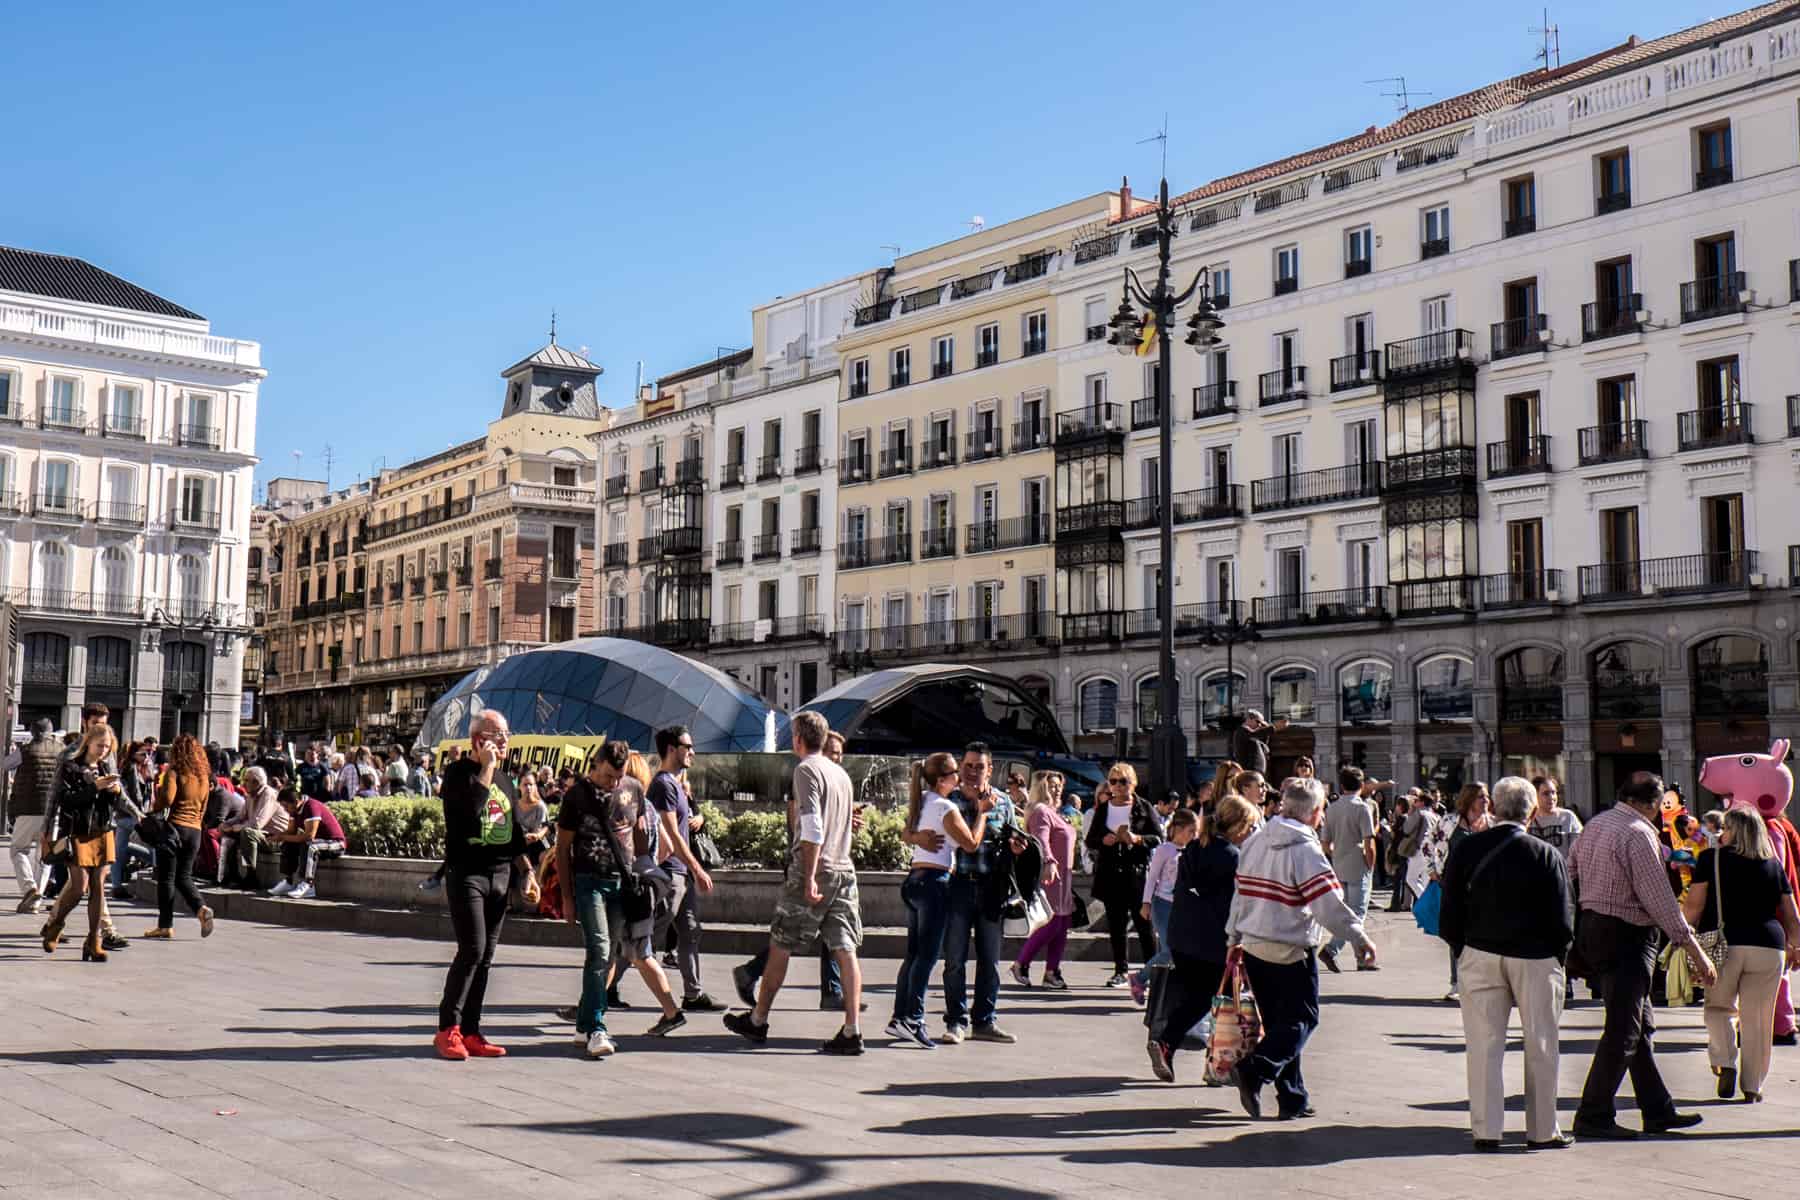 People dispersed in the wide pathways of a public square in Madrid. In the middle of the square is a large oval flowerbed and behind a rows of rectangular, multi-windowed buildings in a blend of white and cream hues.